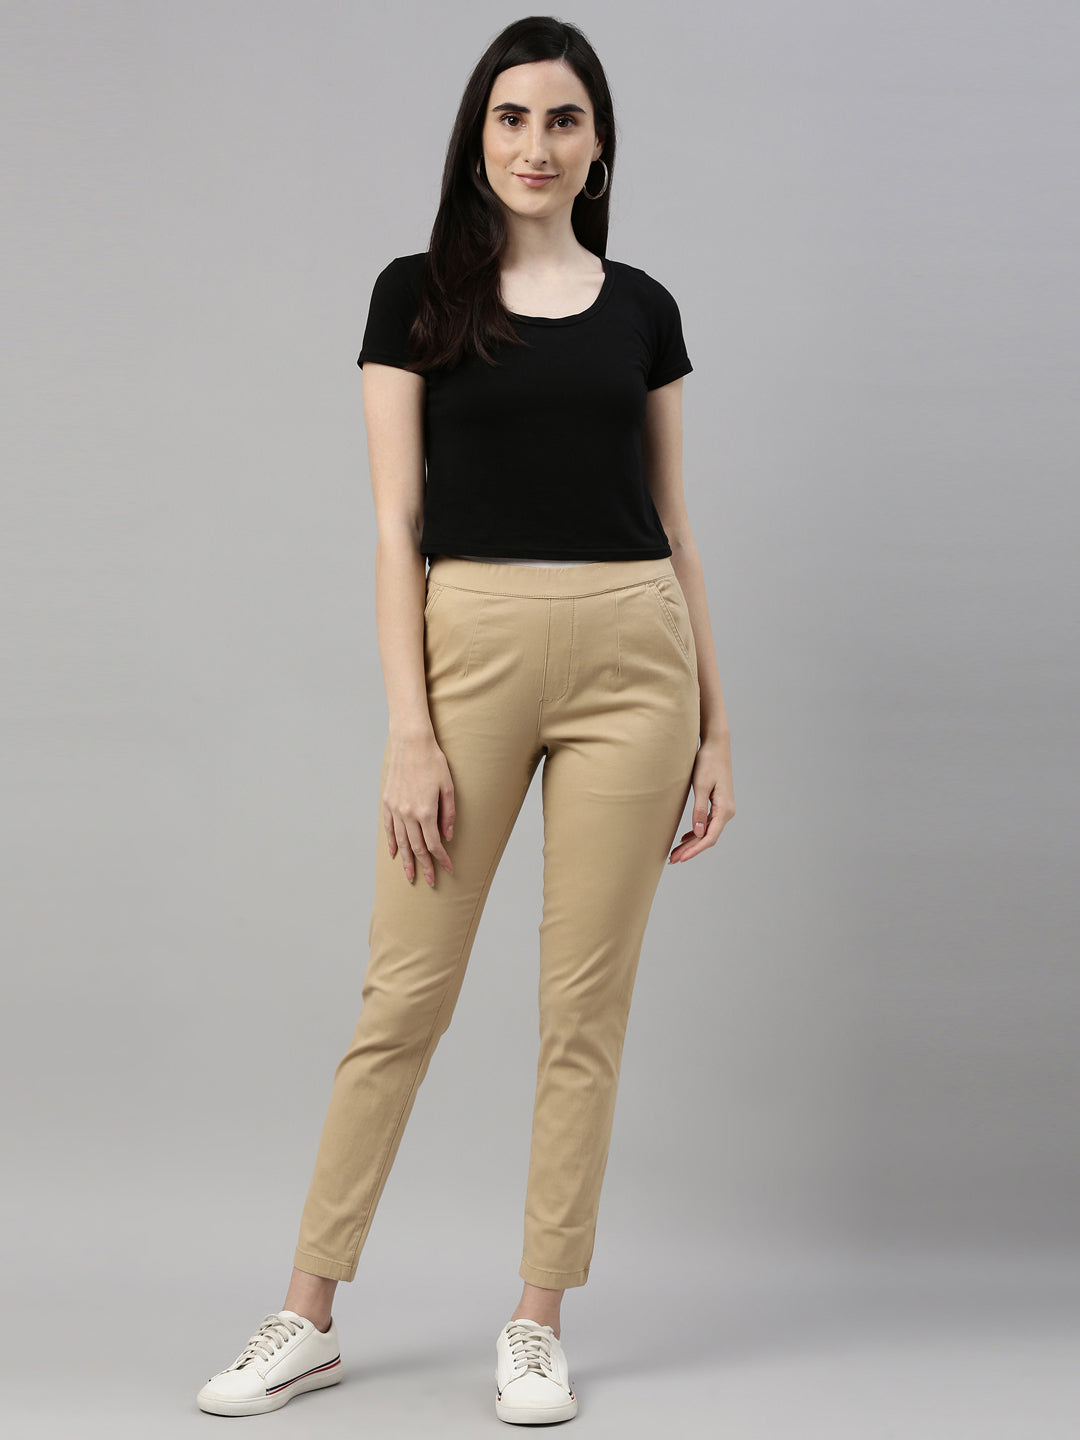 Buy Beige Navy Blue and Olive Green Combo of 3 Solid Women Regular Fit  Trousers Cotton Slub for Best Price Reviews Free Shipping